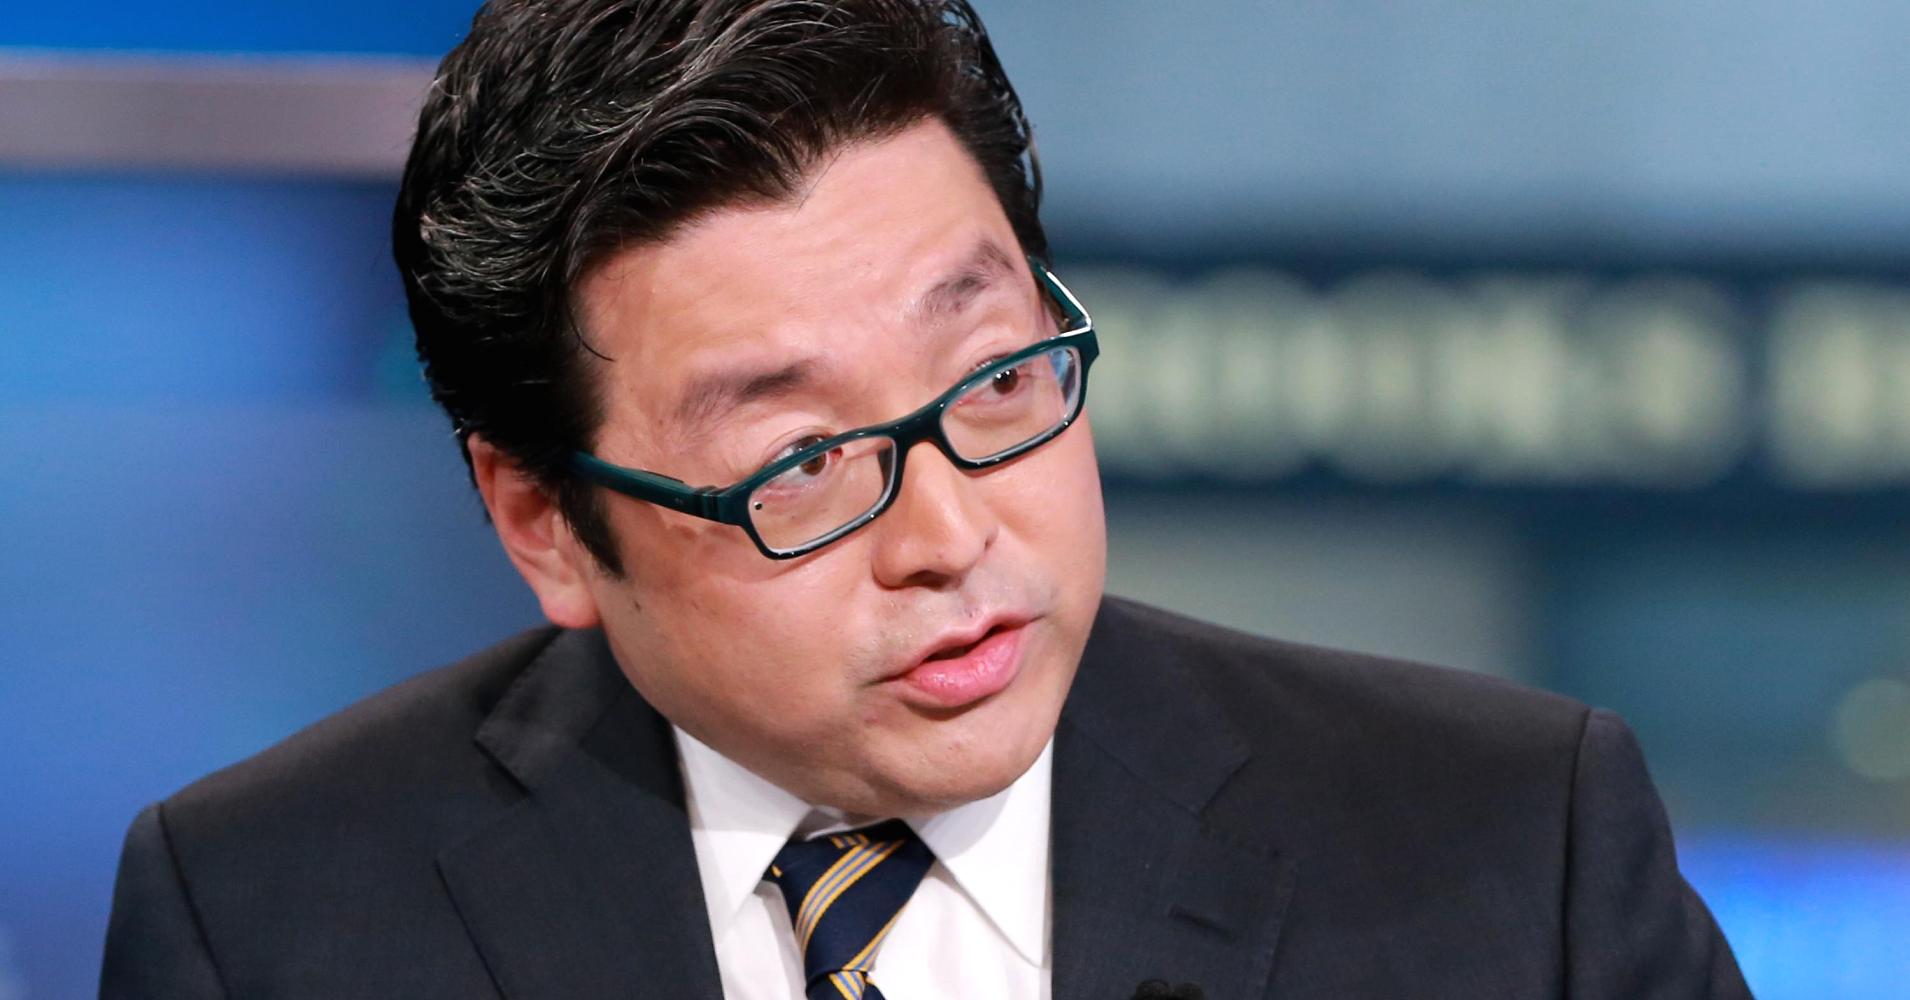 Tom Lee Assures Right Now is a Great Time to Buy/Hodl Bitcoin (BTC)